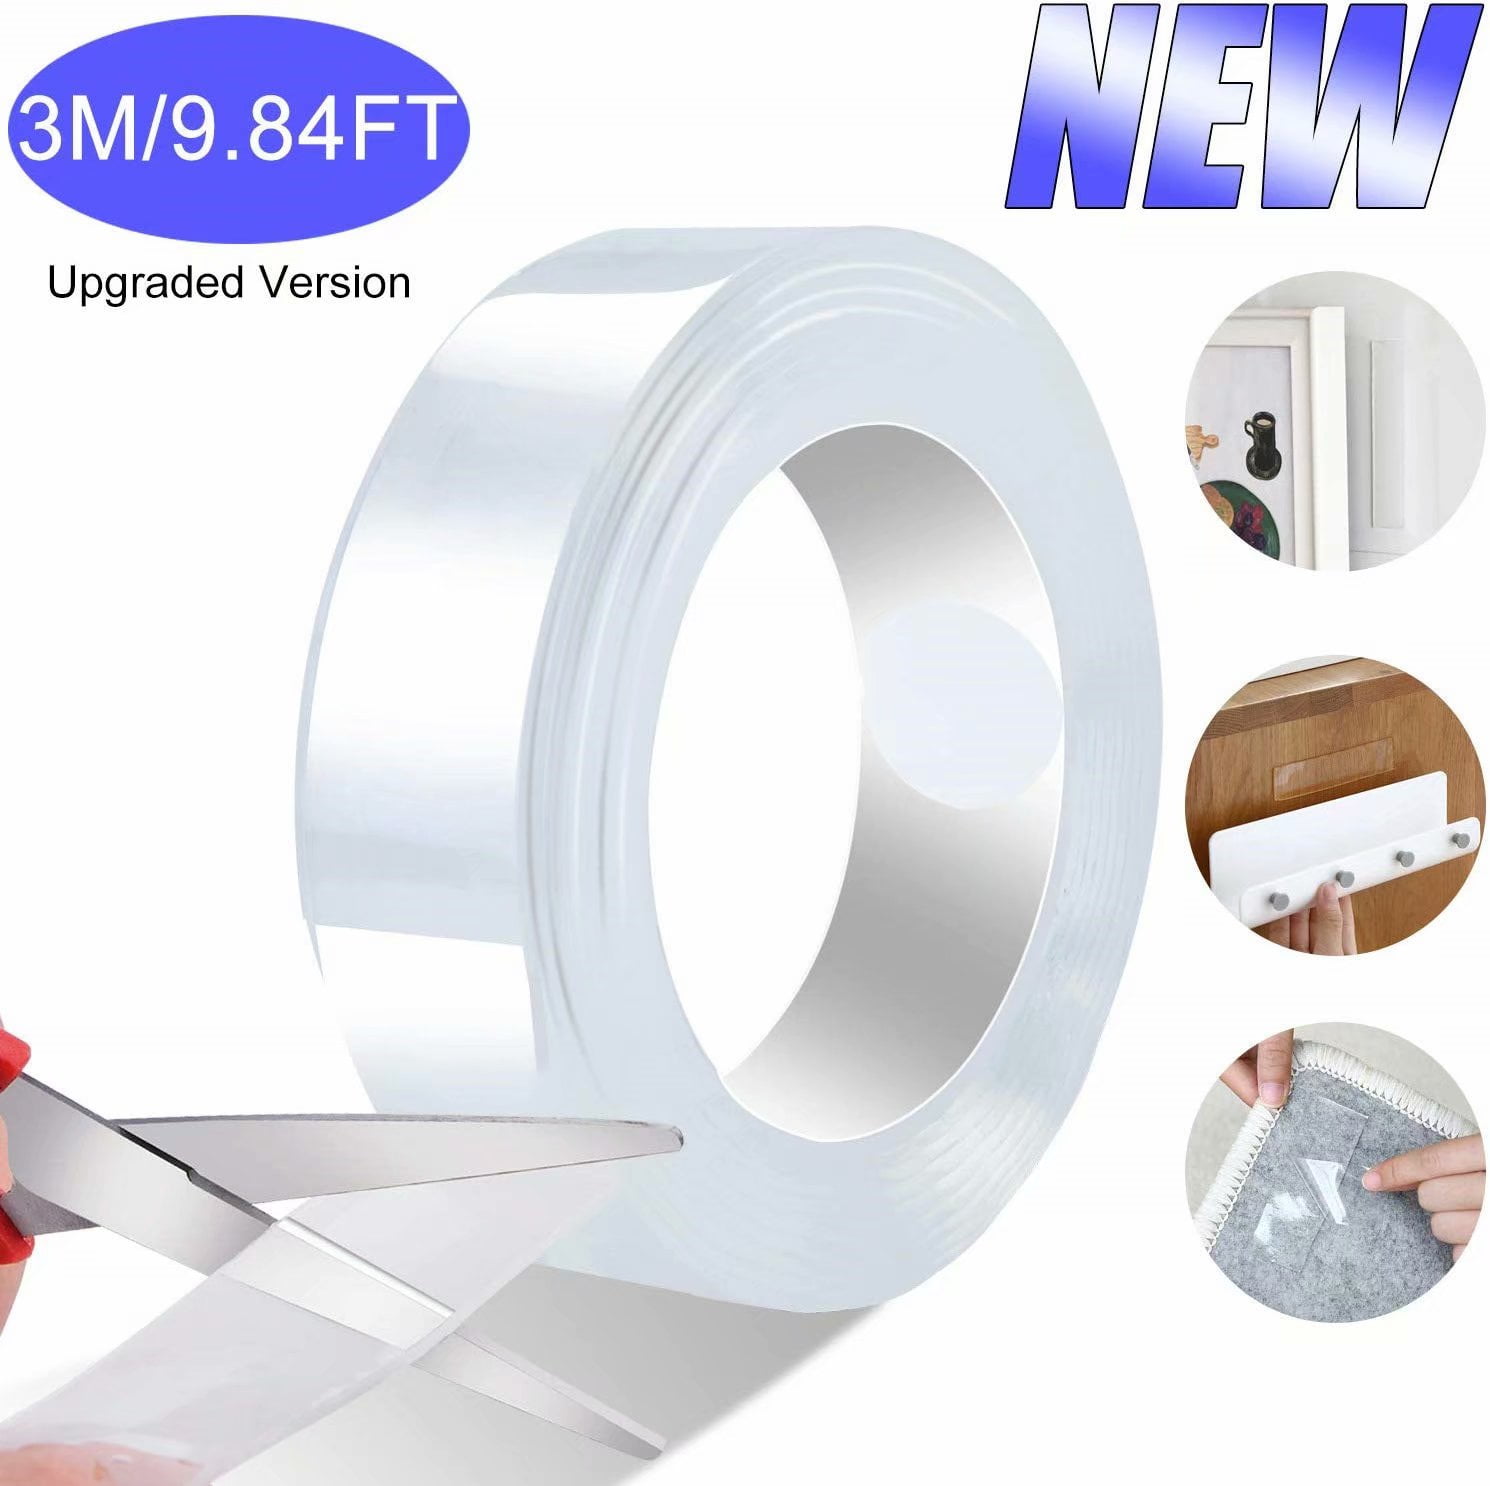 Multi-Functional Anti-Slip Double Sided Sticky Strips Magic Tape Clear 5M 16.5FT Reusable Magic Tape Adhesive Silicone Tape